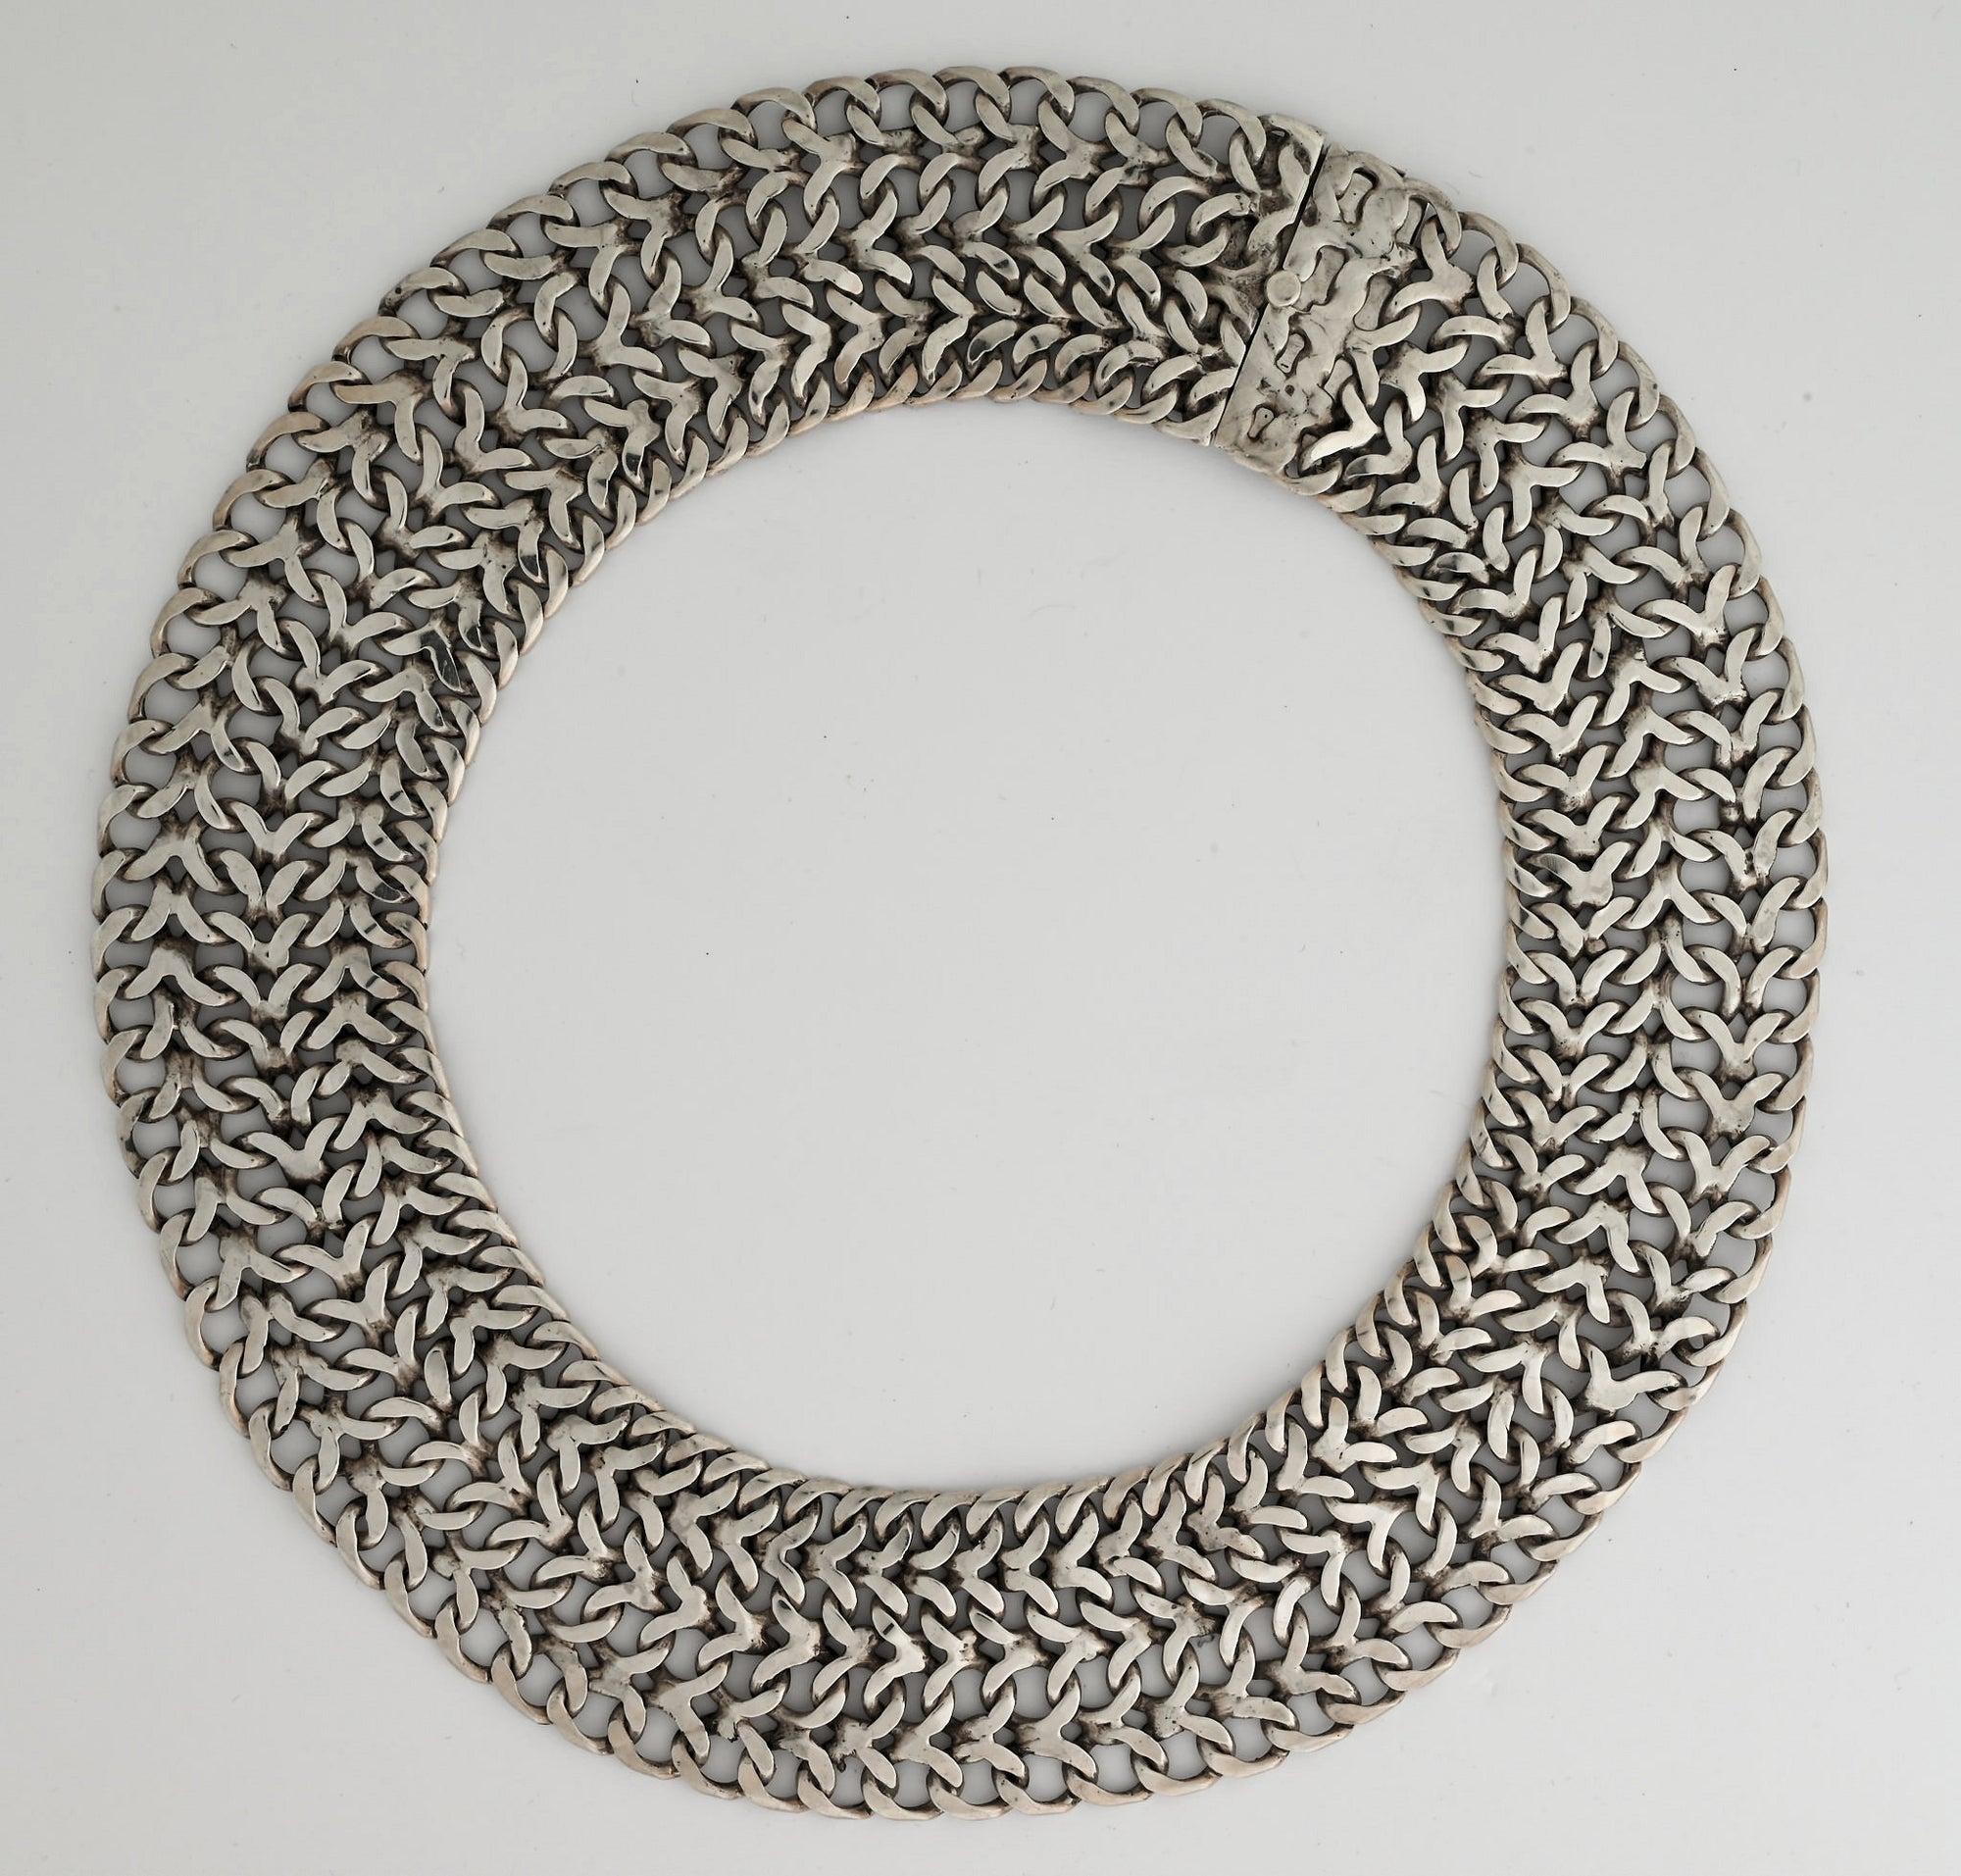 Woven Silver Collar (Mexico) by unknown